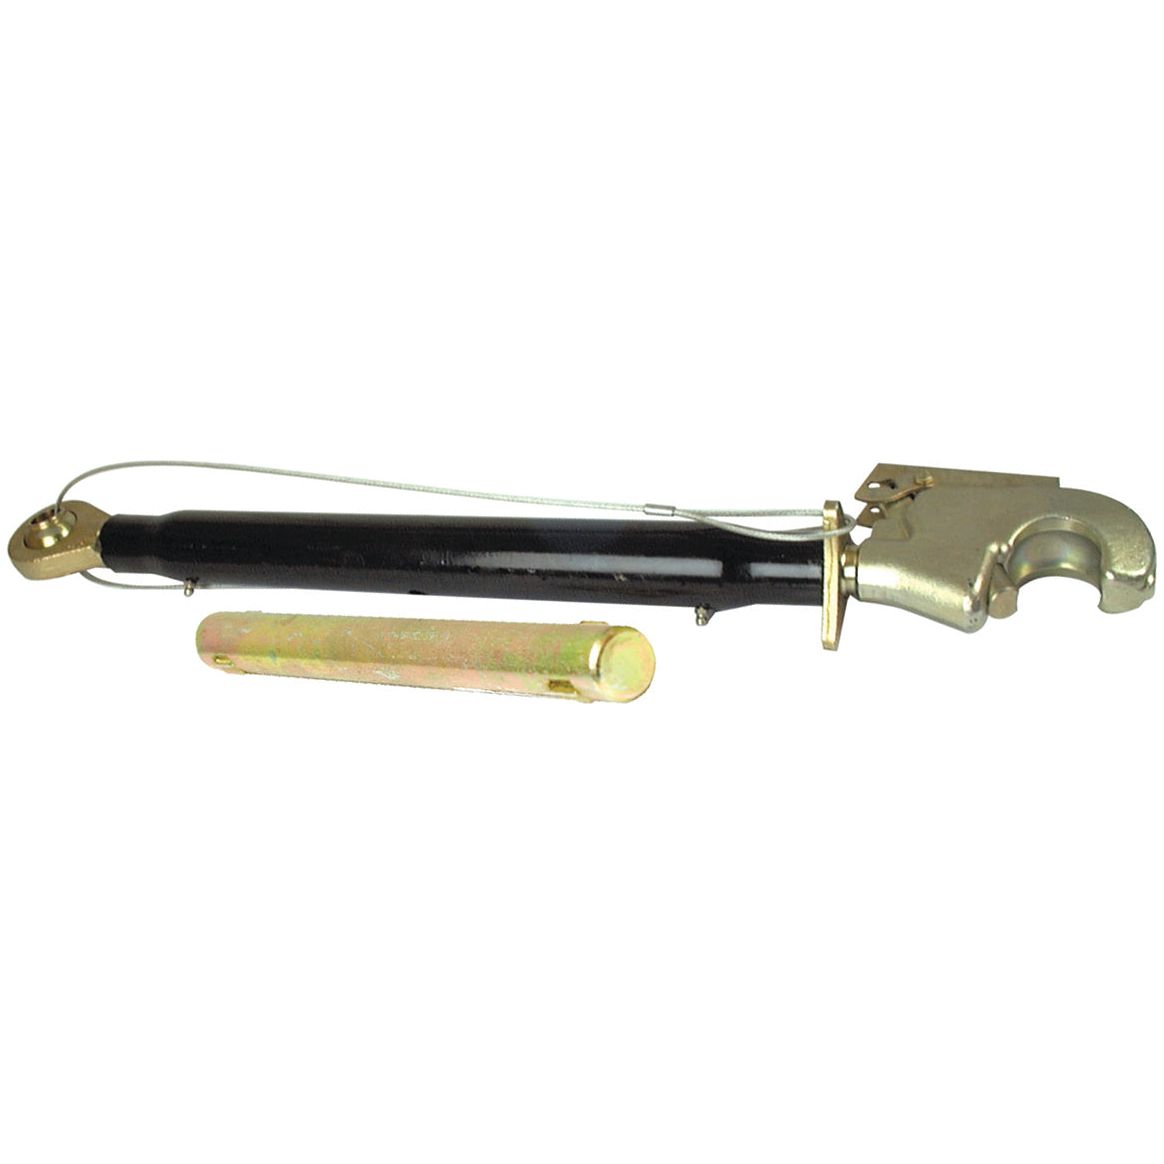 Top Link Heavy Duty (Cat.2/2) Ball and Q.R. Hook,  1 1/4'', Min. Length: 560mm.
 - S.74056 - Farming Parts